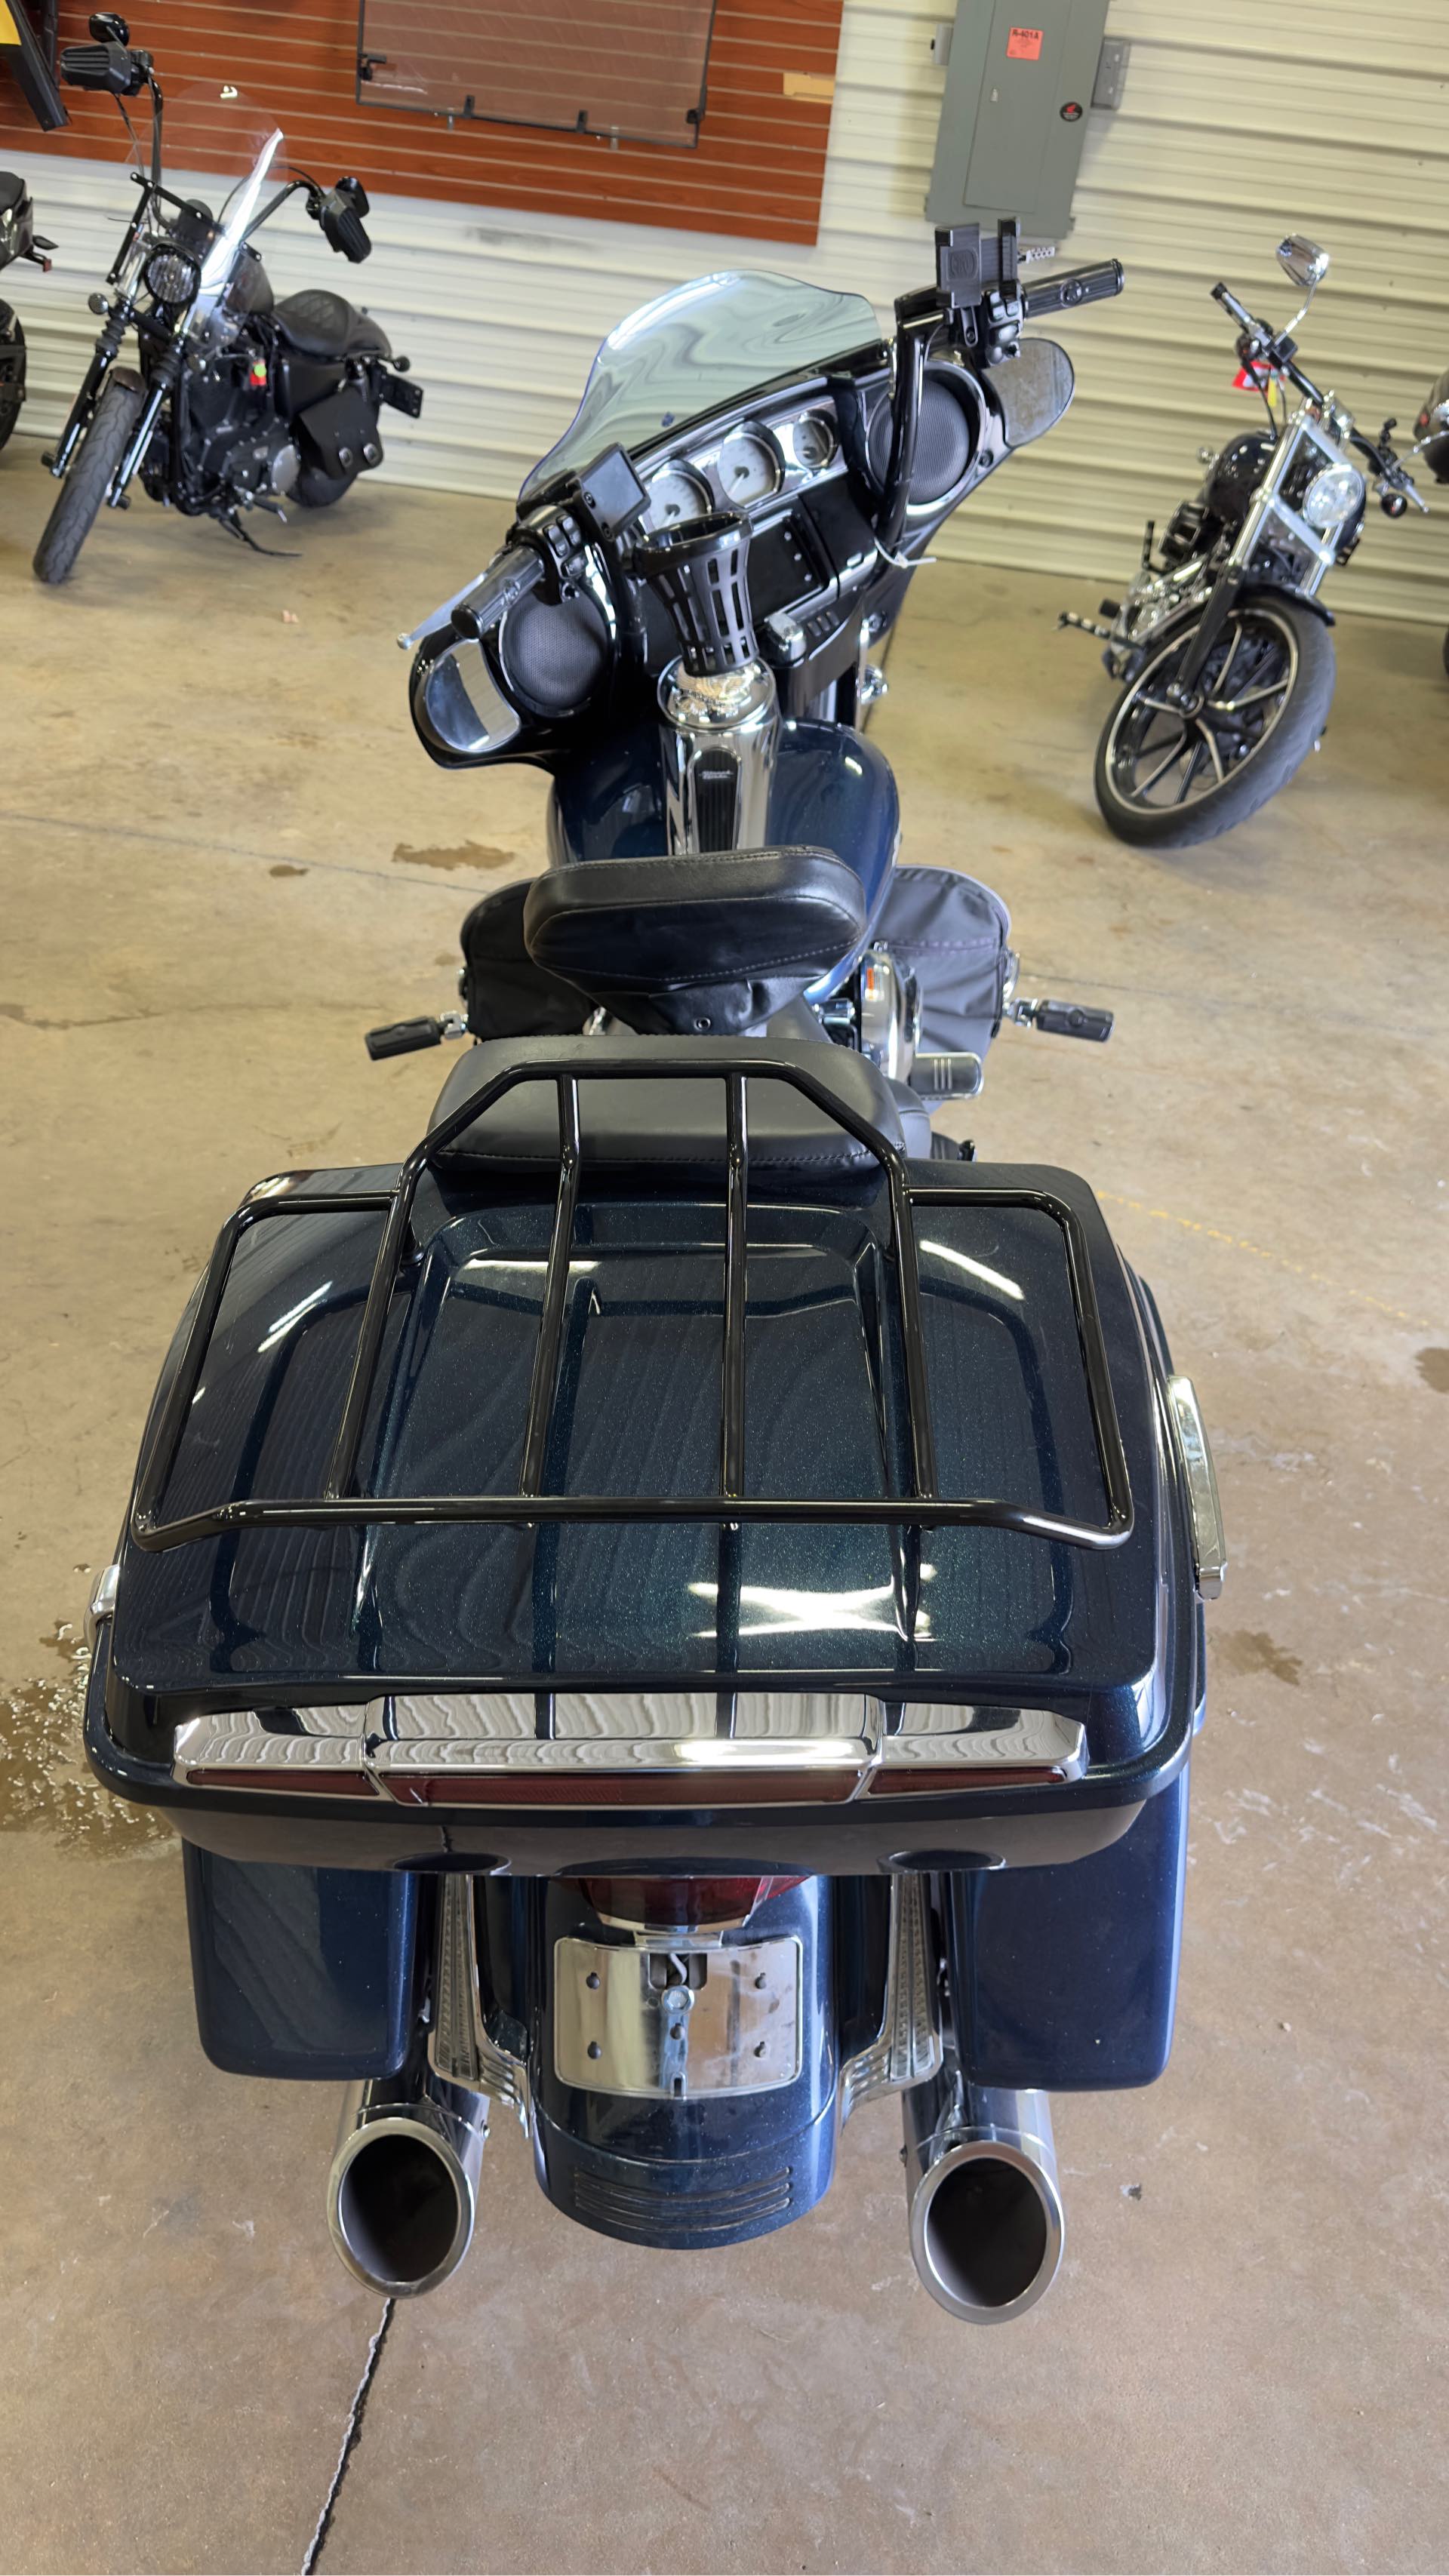 2016 Harley-Davidson Street Glide Special at Southern Illinois Motorsports